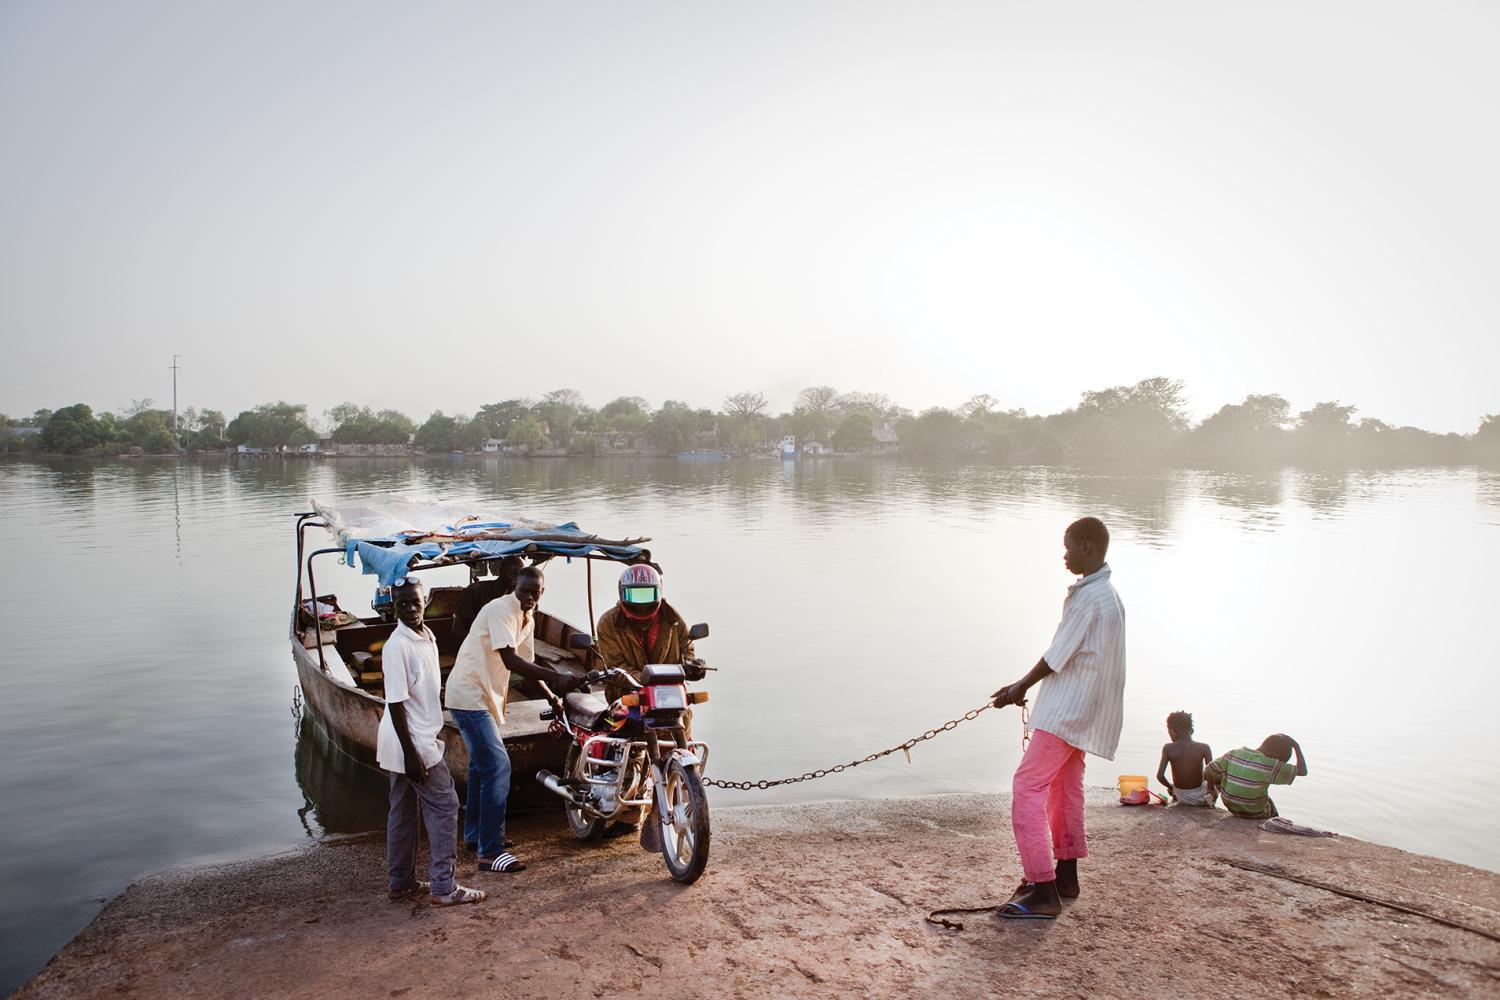 Small metal ferries, called barras, are the main way to cross the Gambia River in the upcountry regions of the Republic of Gambia. Some barras are motorized, but most are rowed with a single paddle attached to the stern.